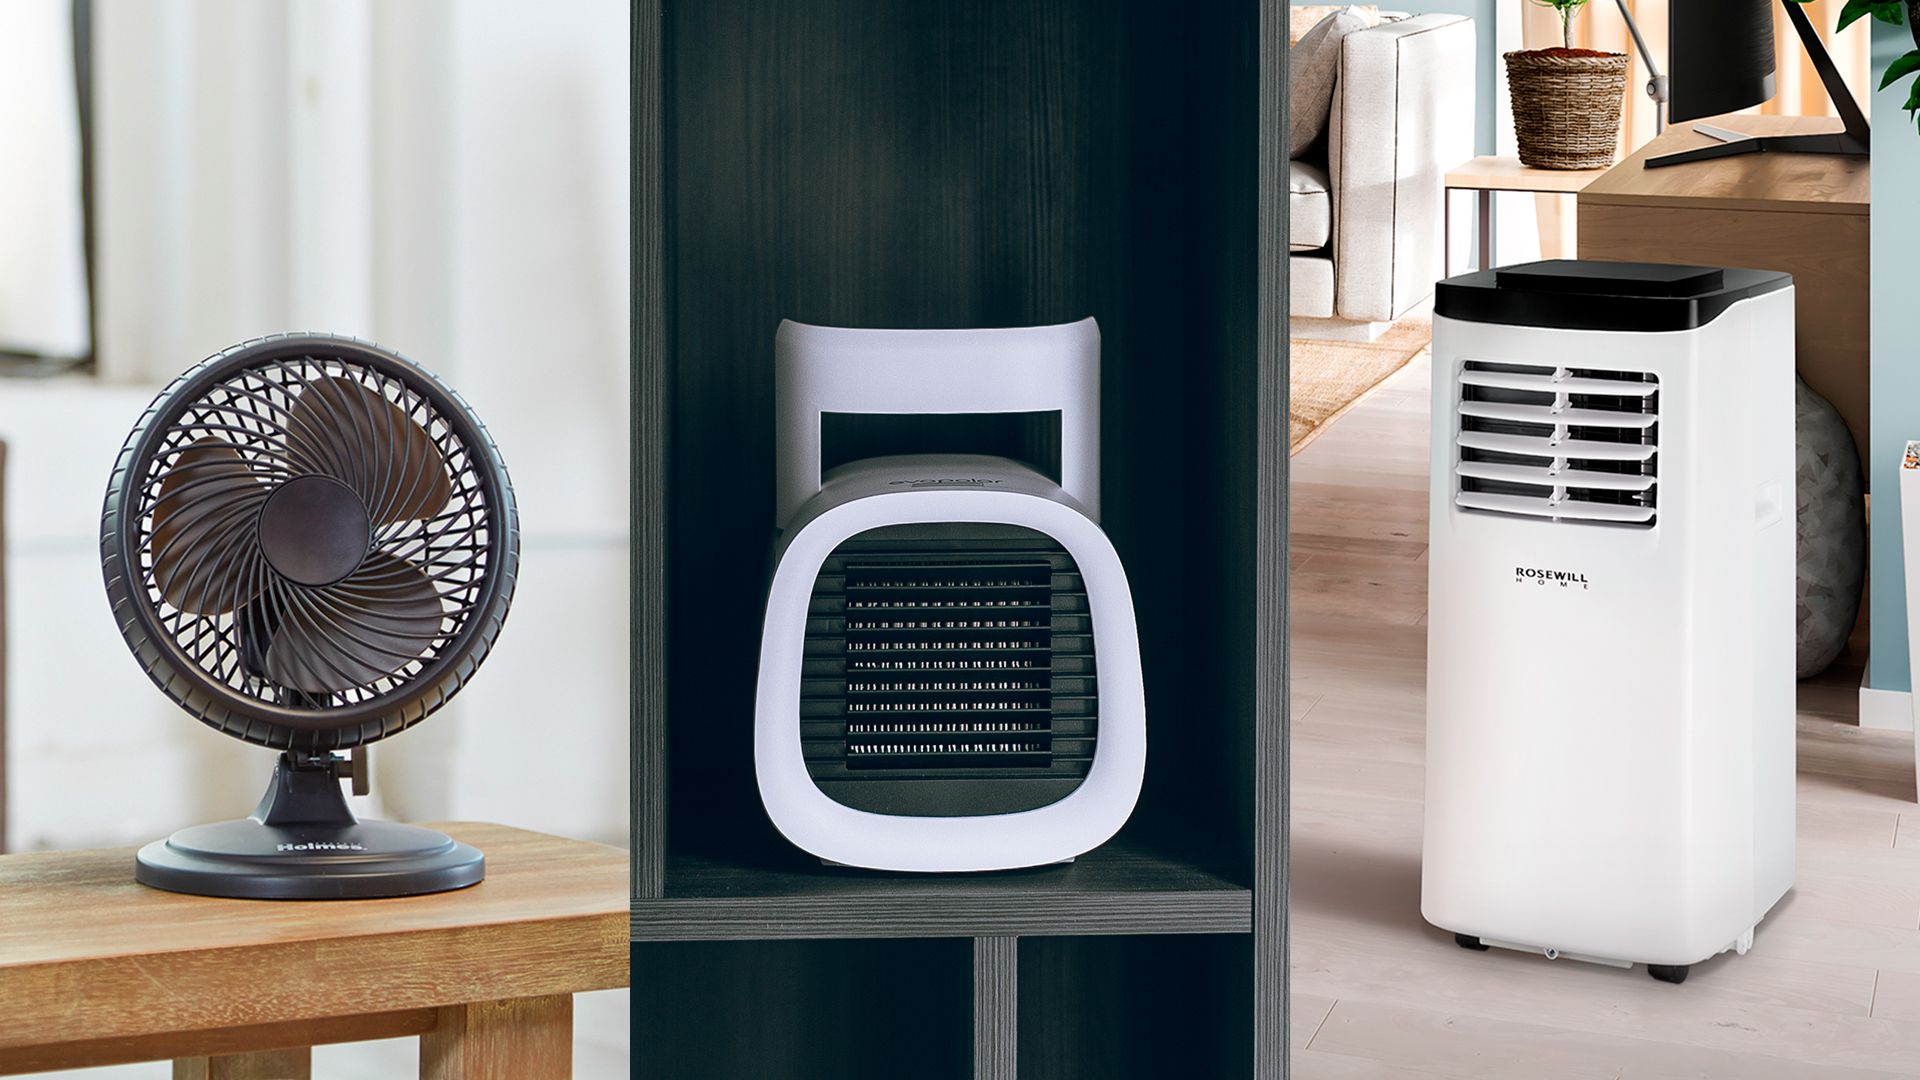 Portable Air Coolers and Conditioners picture from google